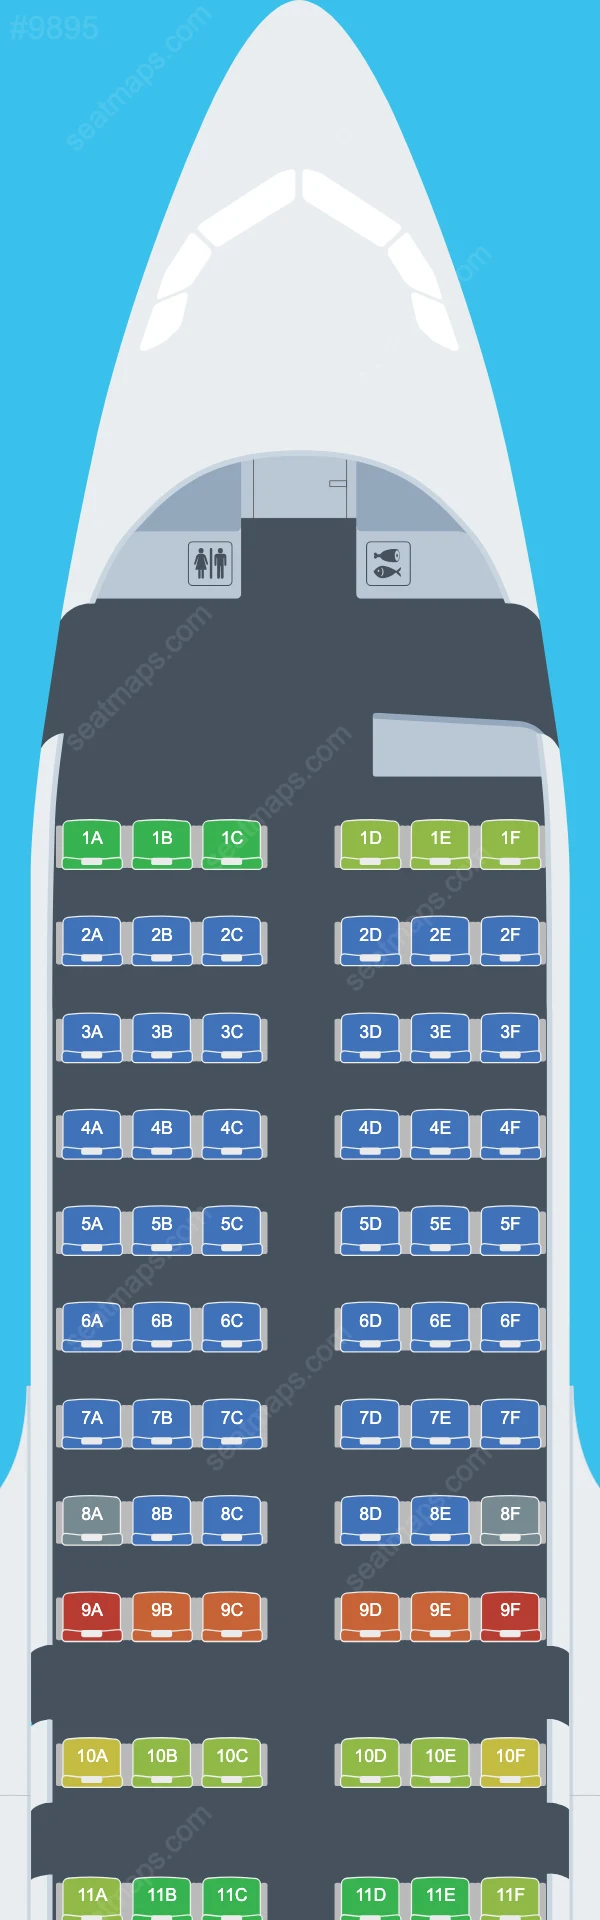 Hi Fly Airbus A319 Seat Maps A319-100 V.2